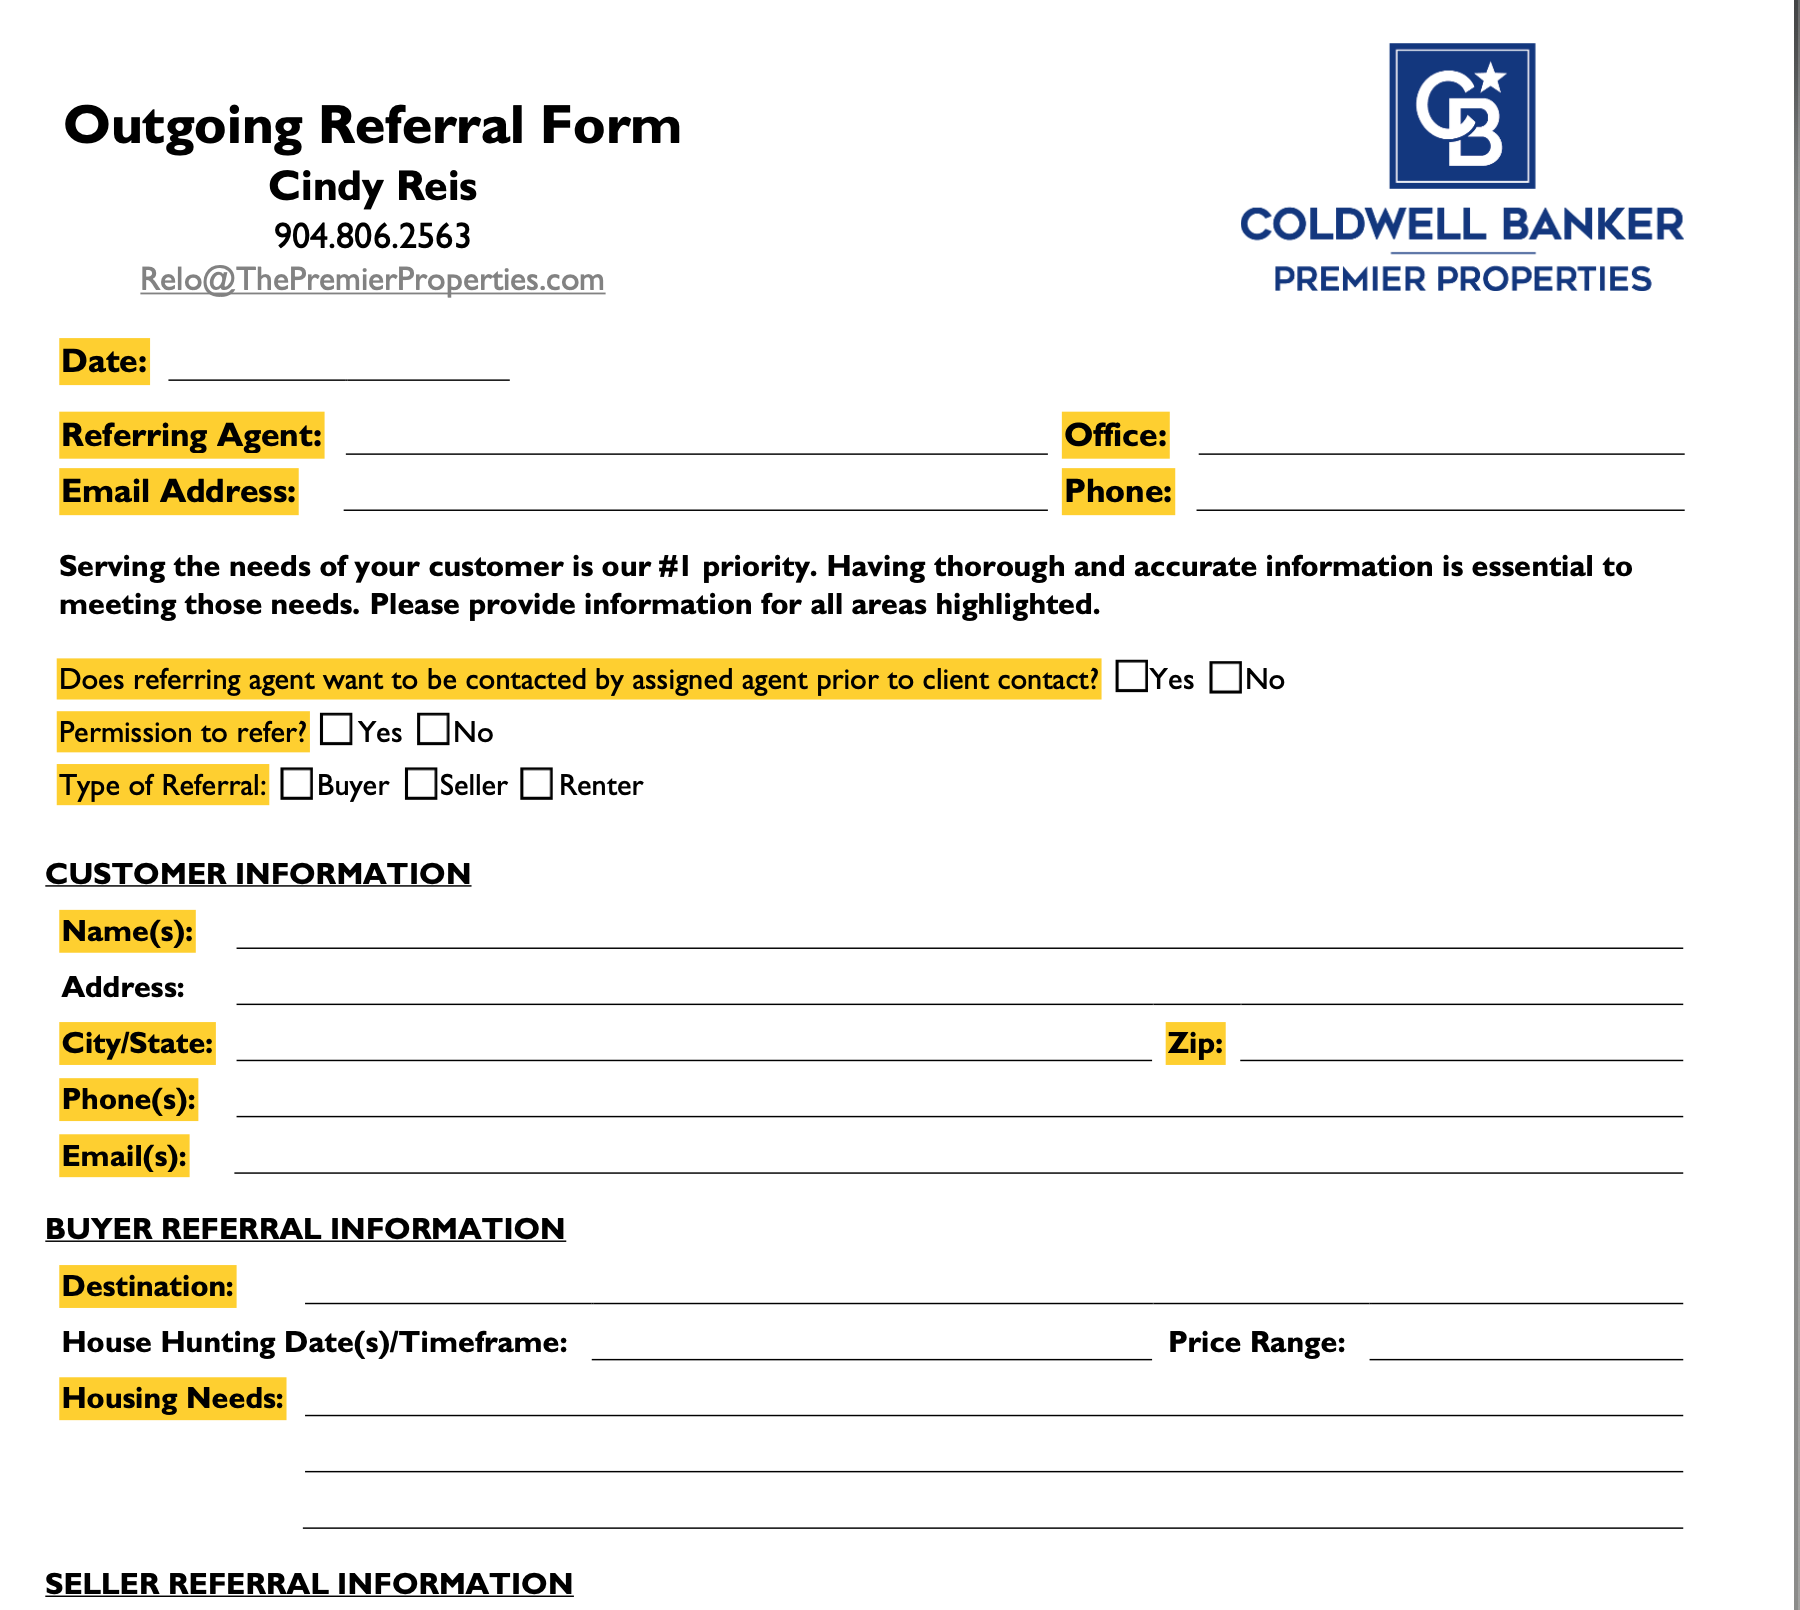 Outgoing Referral Form PREMIER PROPERTIES